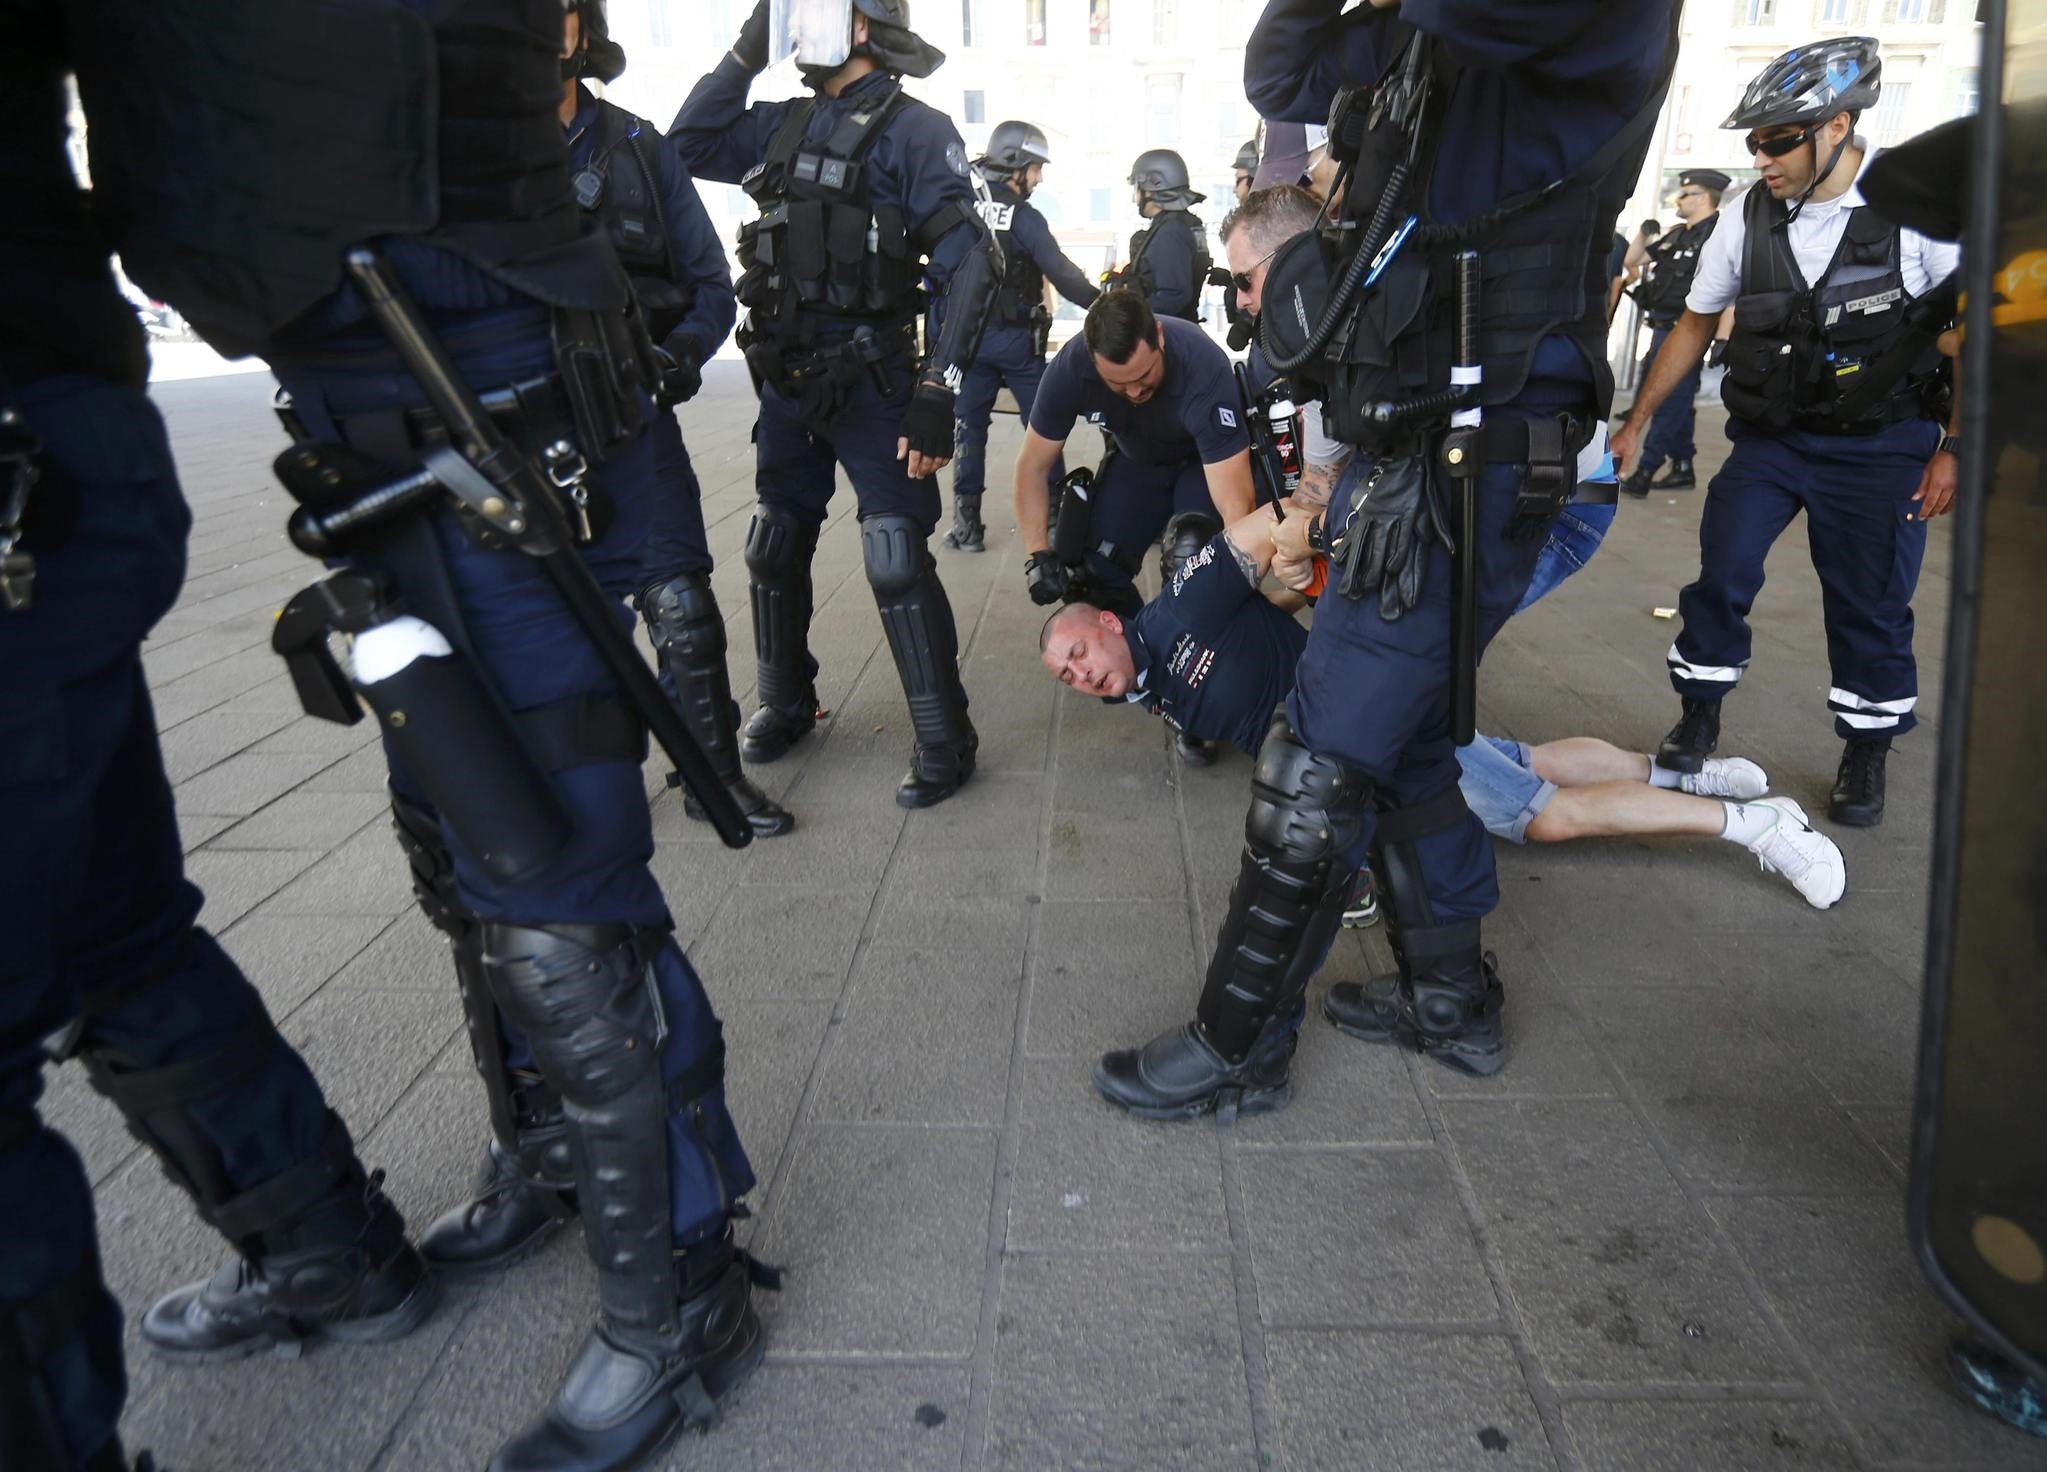 A Poland fan is detained by police at the old port of Marseille, France. (Reuters Photo)